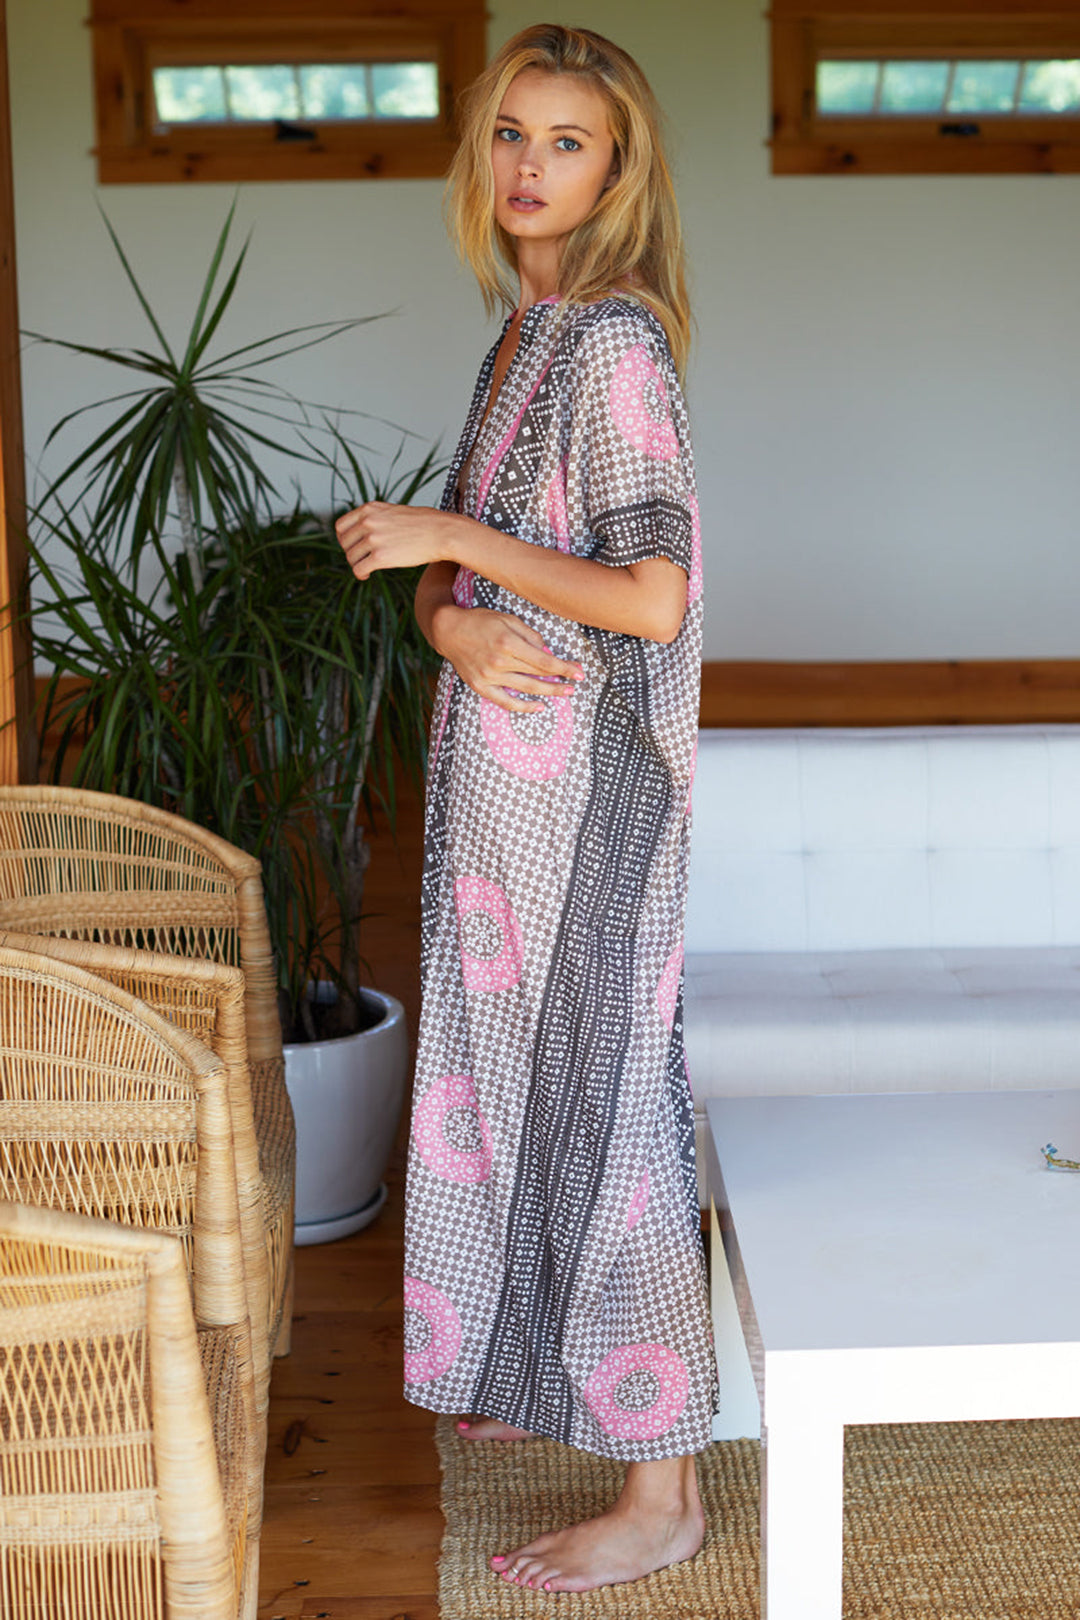 Emerson Fry Emerson Caftan beach cover-up in Rhodolite Organic pink and mauve print at Inner Beach Co, Toronto, Canada